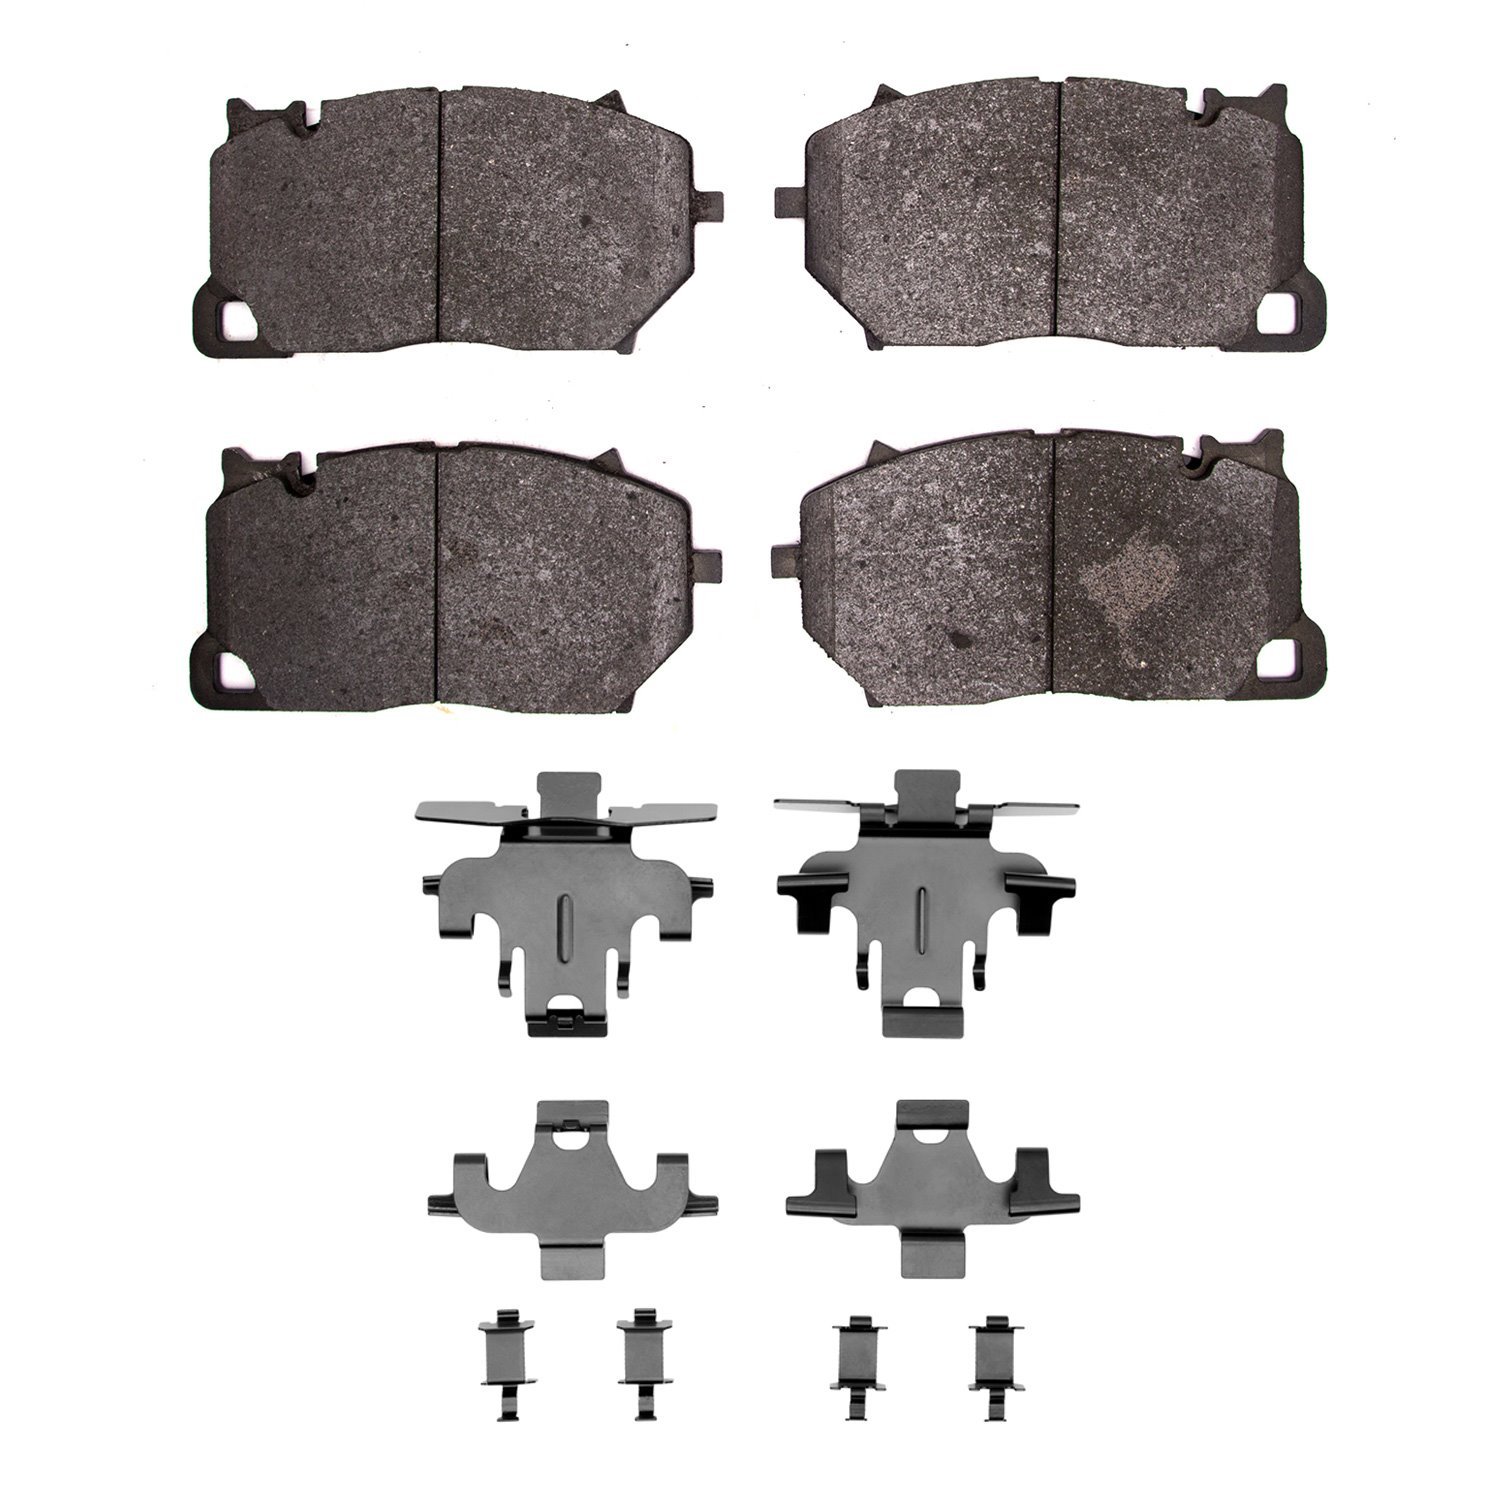 1551-1899-01 5000 Advanced Low-Metallic Brake Pads & Hardware Kit, Fits Select Multiple Makes/Models, Position: Front